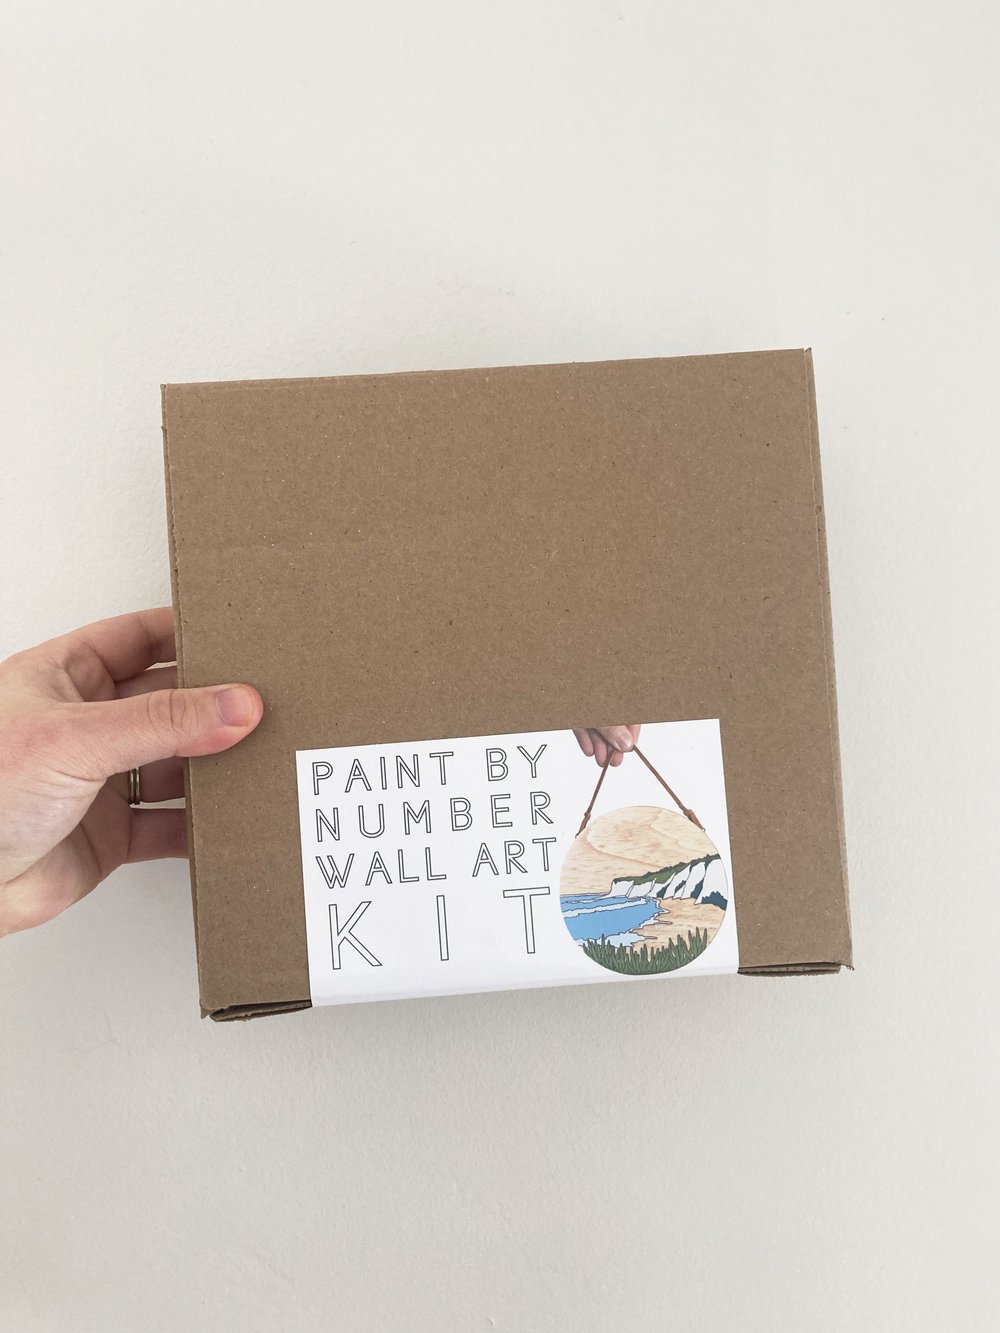 Paint by Number Kits